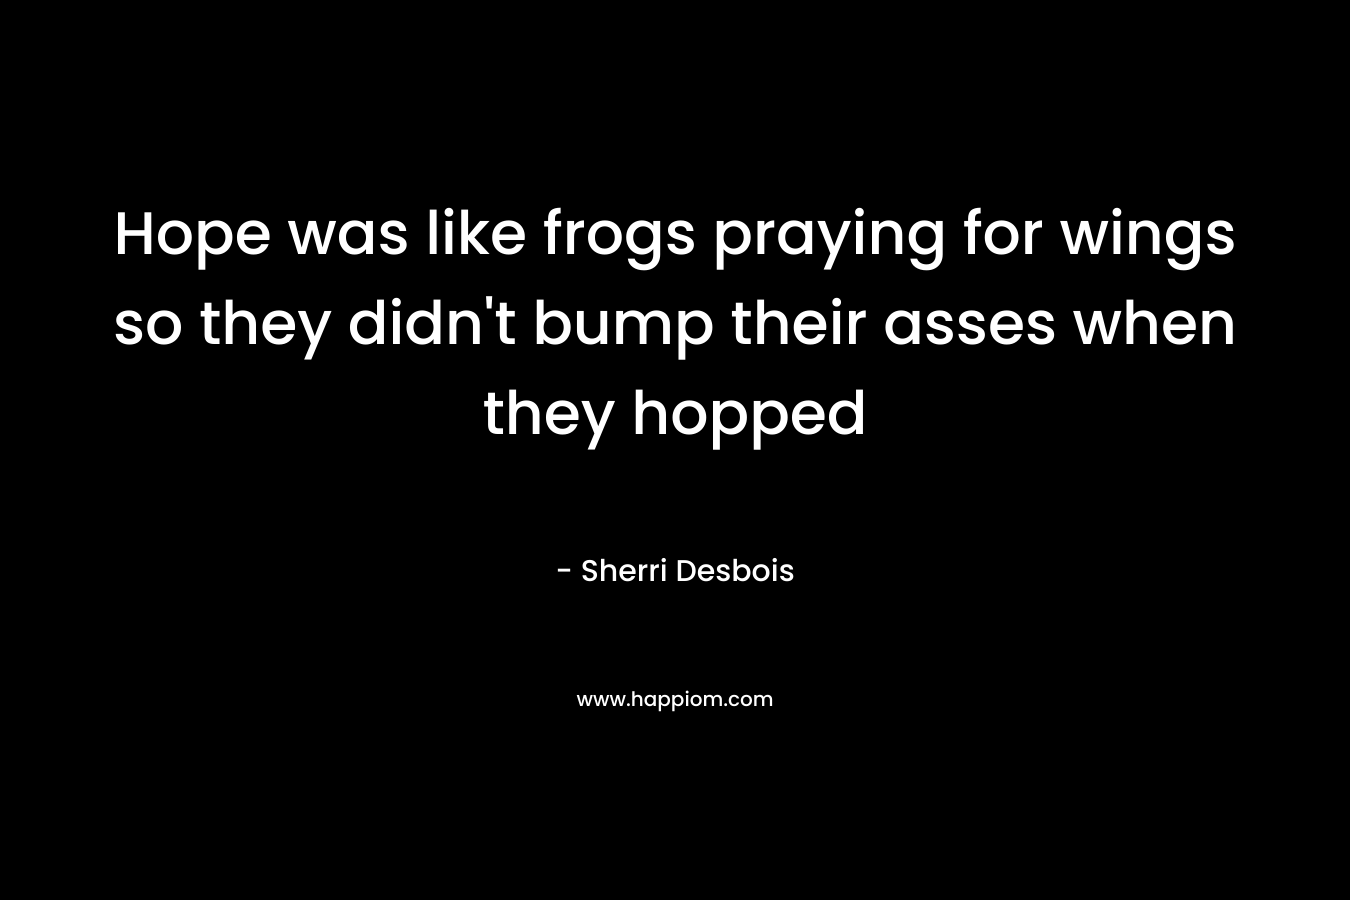 Hope was like frogs praying for wings so they didn’t bump their asses when they hopped – Sherri Desbois